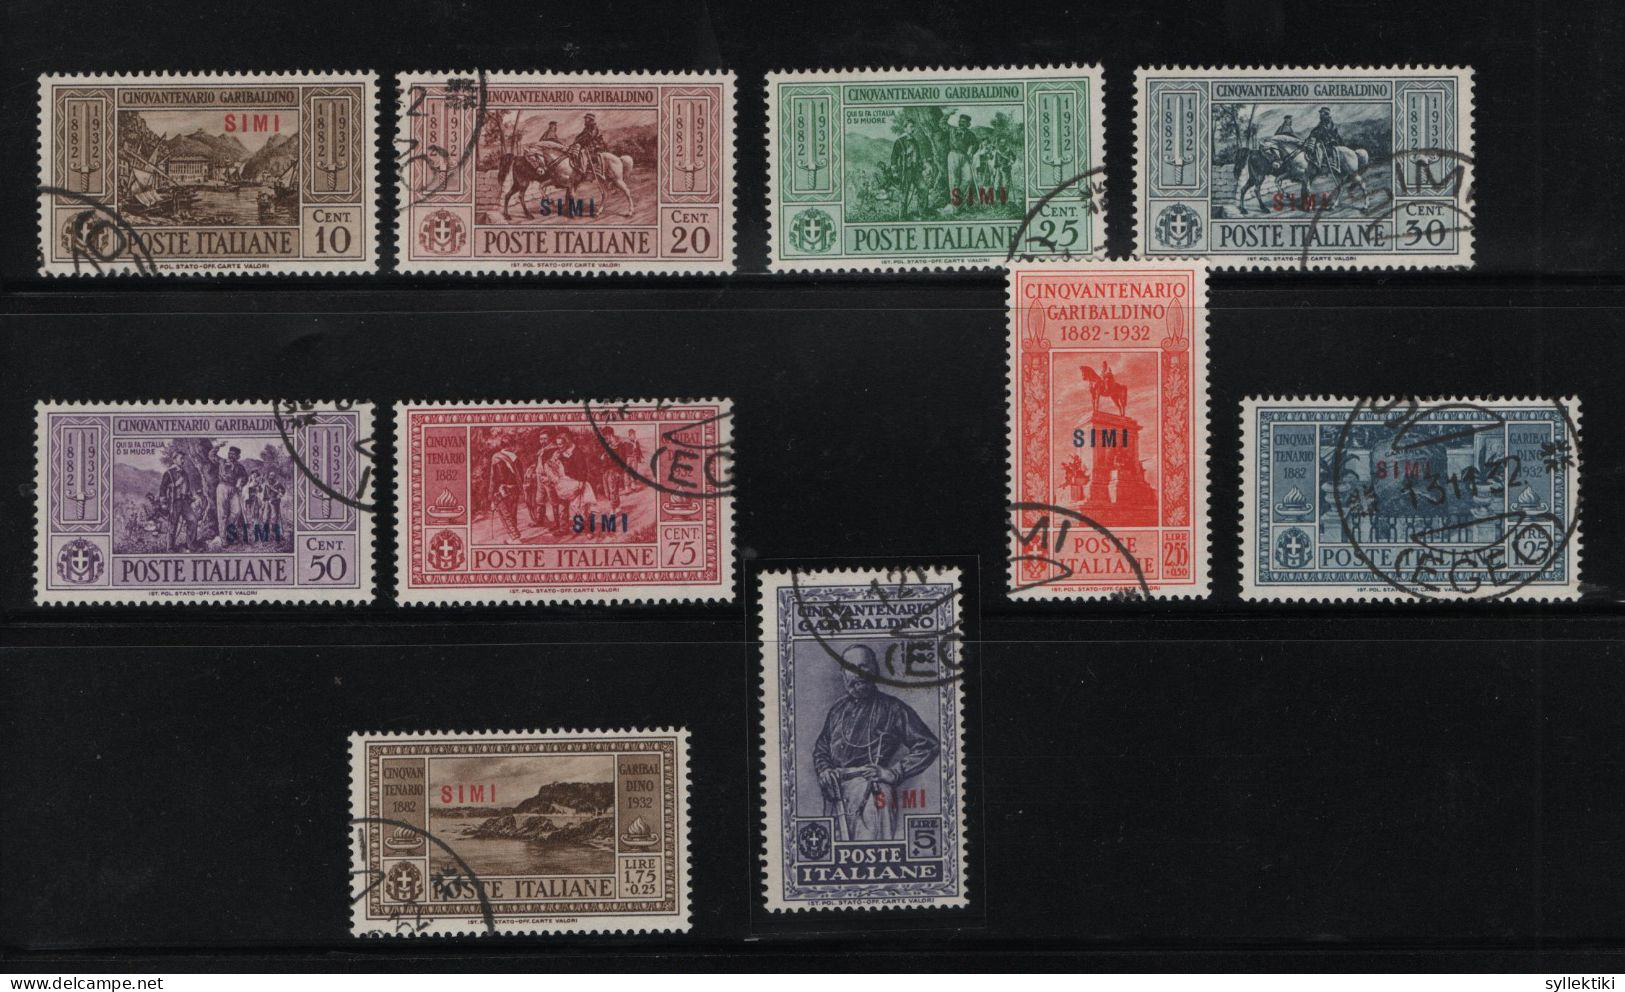 GREECE 1932 DODECANESE GARIBALDI ISSUE SIMI OVERPRINT COMPLETE SET USED STAMPS   HELLAS No 108XIII - 117XIII AND VALUE - Dodecaneso